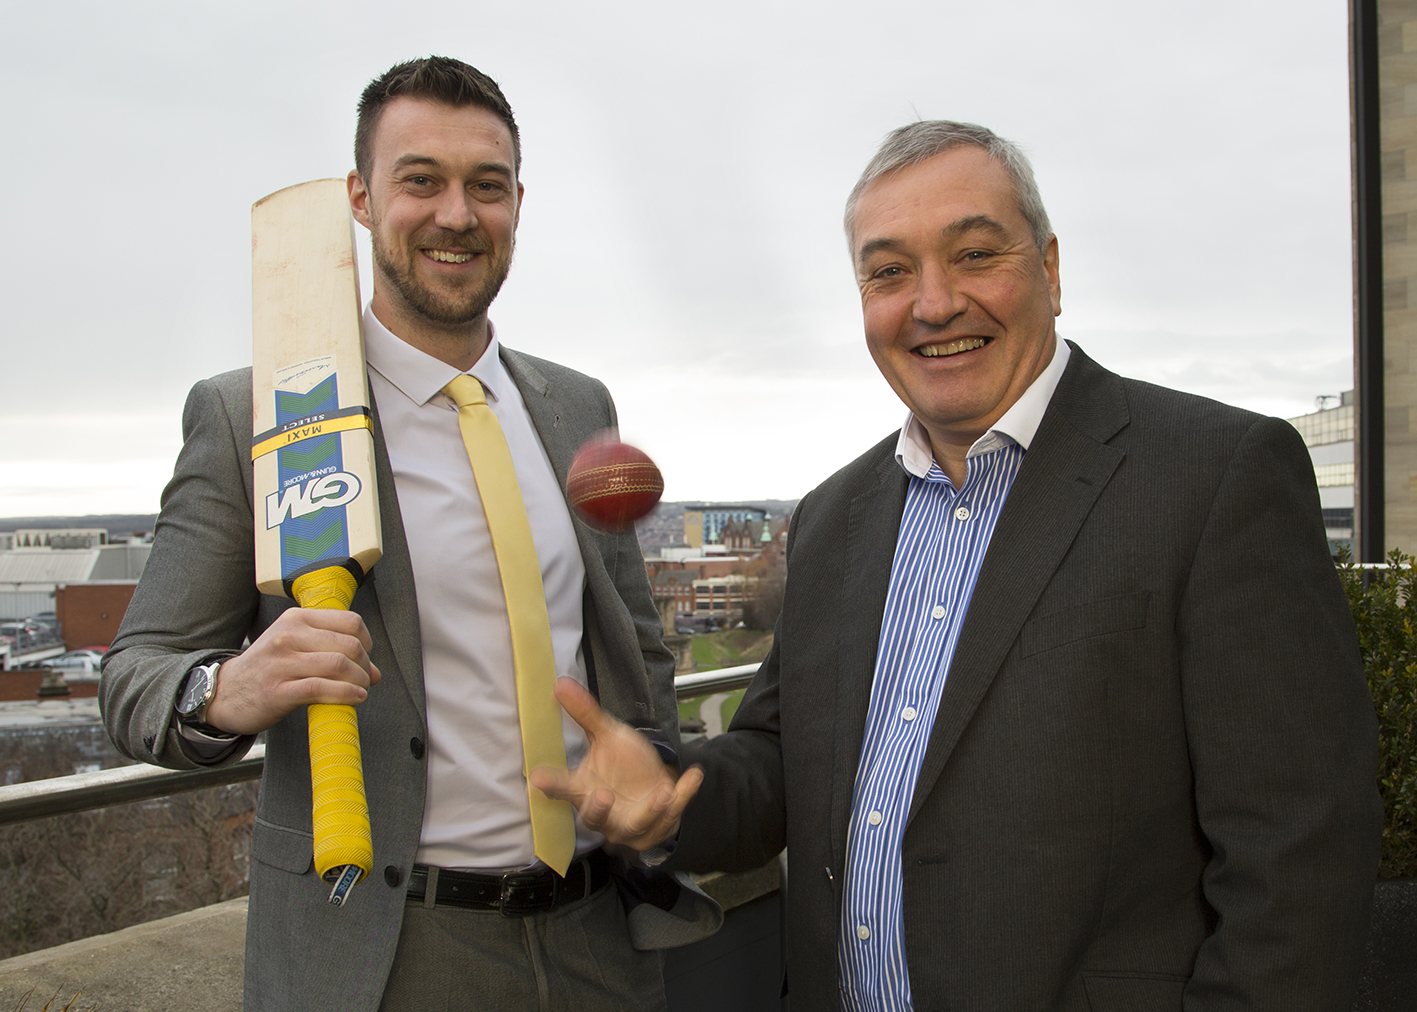 HOWZAT? : Muckle LLP lawyers Anthony Coultas and Tony McPhillips, celebrate statistics released by the Caribbean Premier League showing a greater global audience and further success for their T20 cricket tournament (CPLT20).